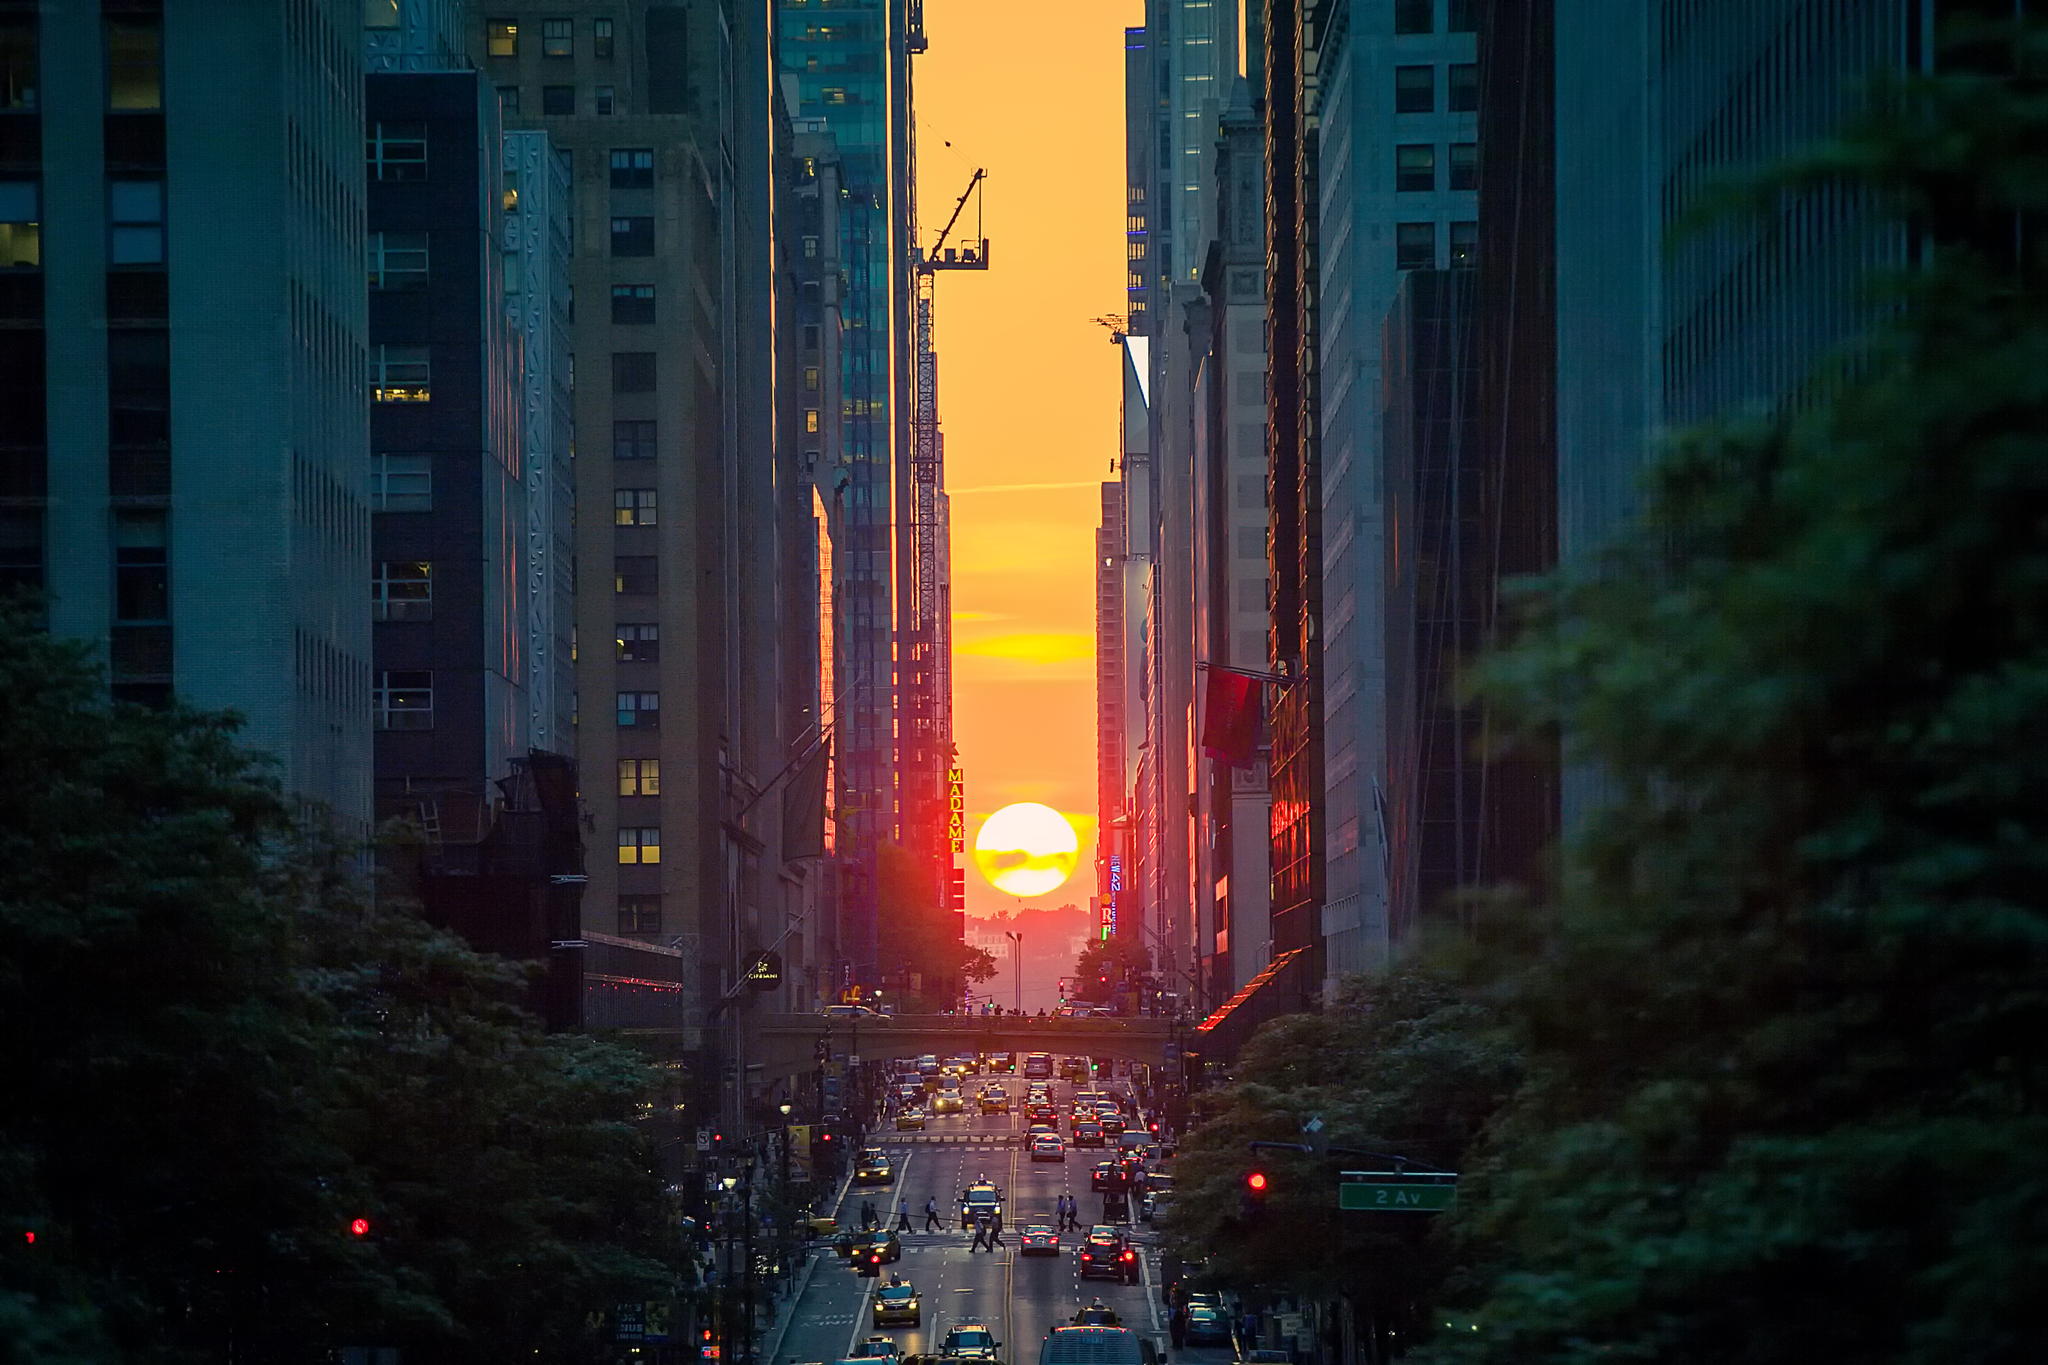 Photo Challenge: Don't Miss Out On The Manhattanhenge